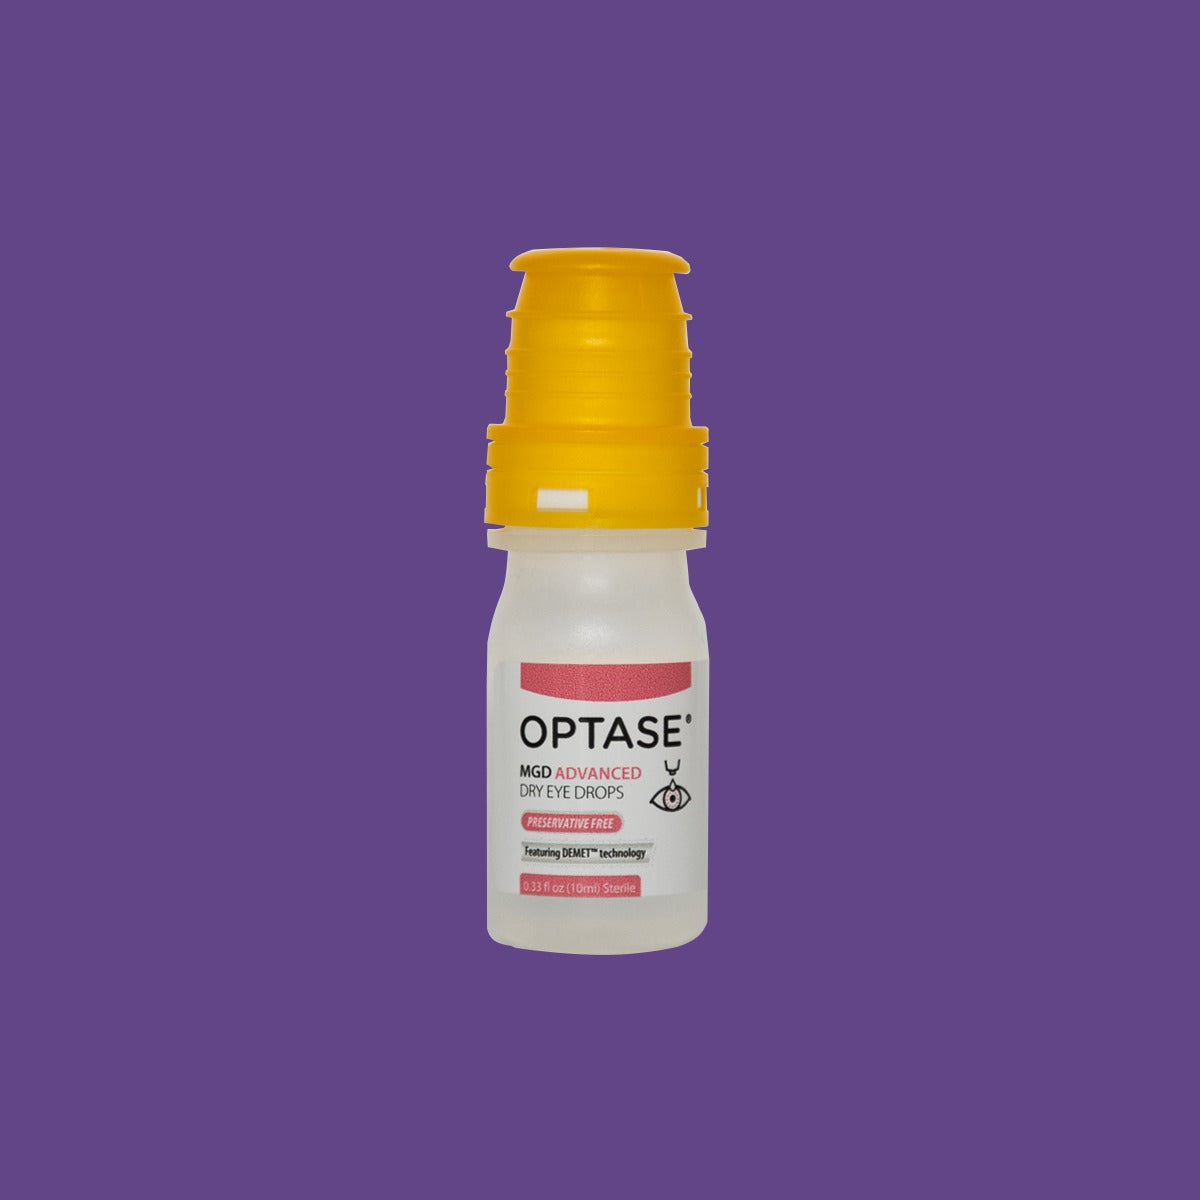 Optase MGD Advanced Dry Eye Drops Preservative-Free 2 Month Supply (300 drops)